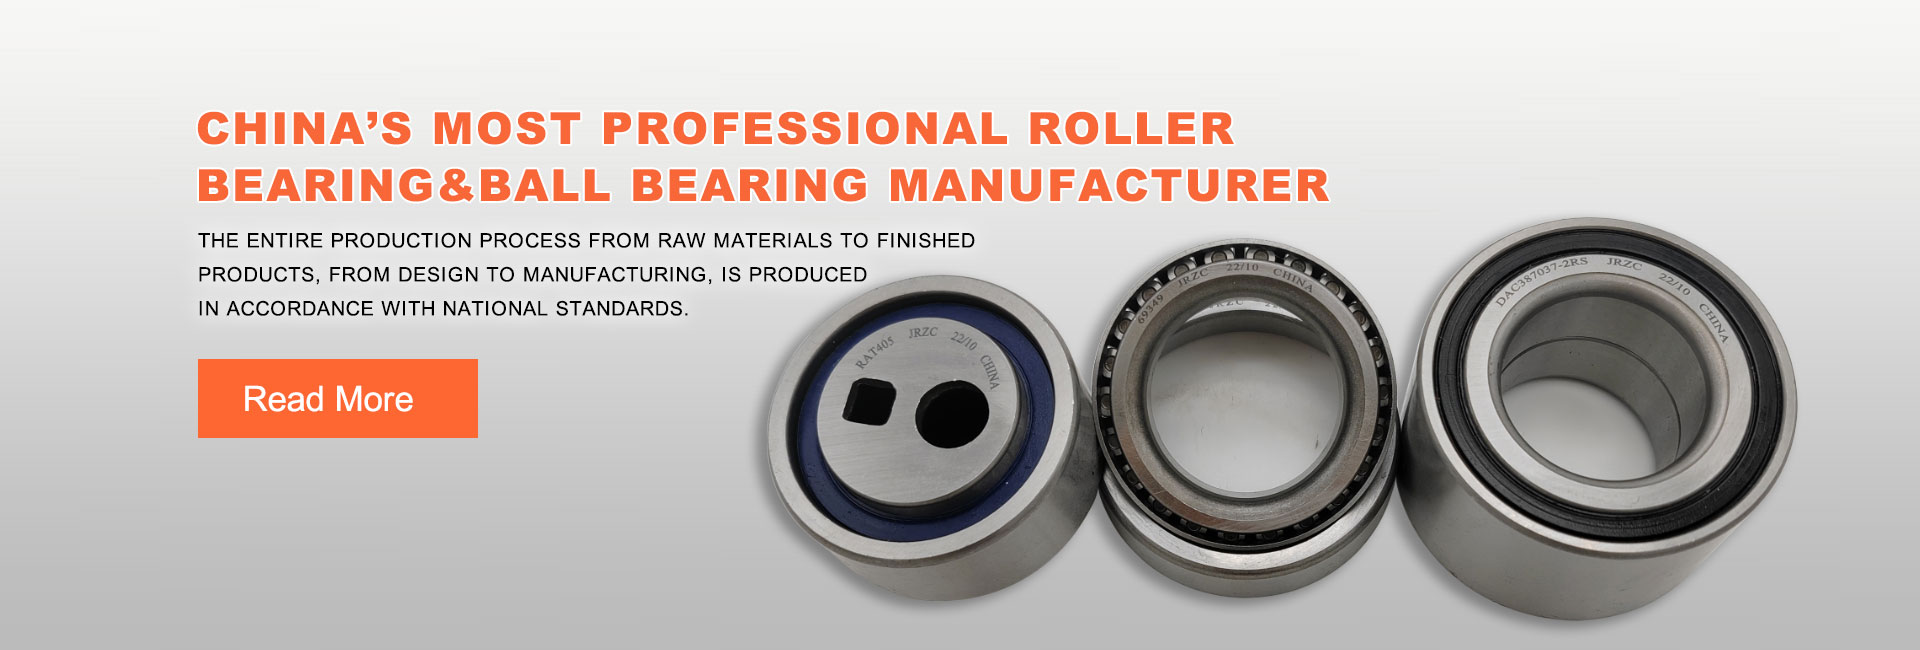 20 years of experience  in manufacturing bearings